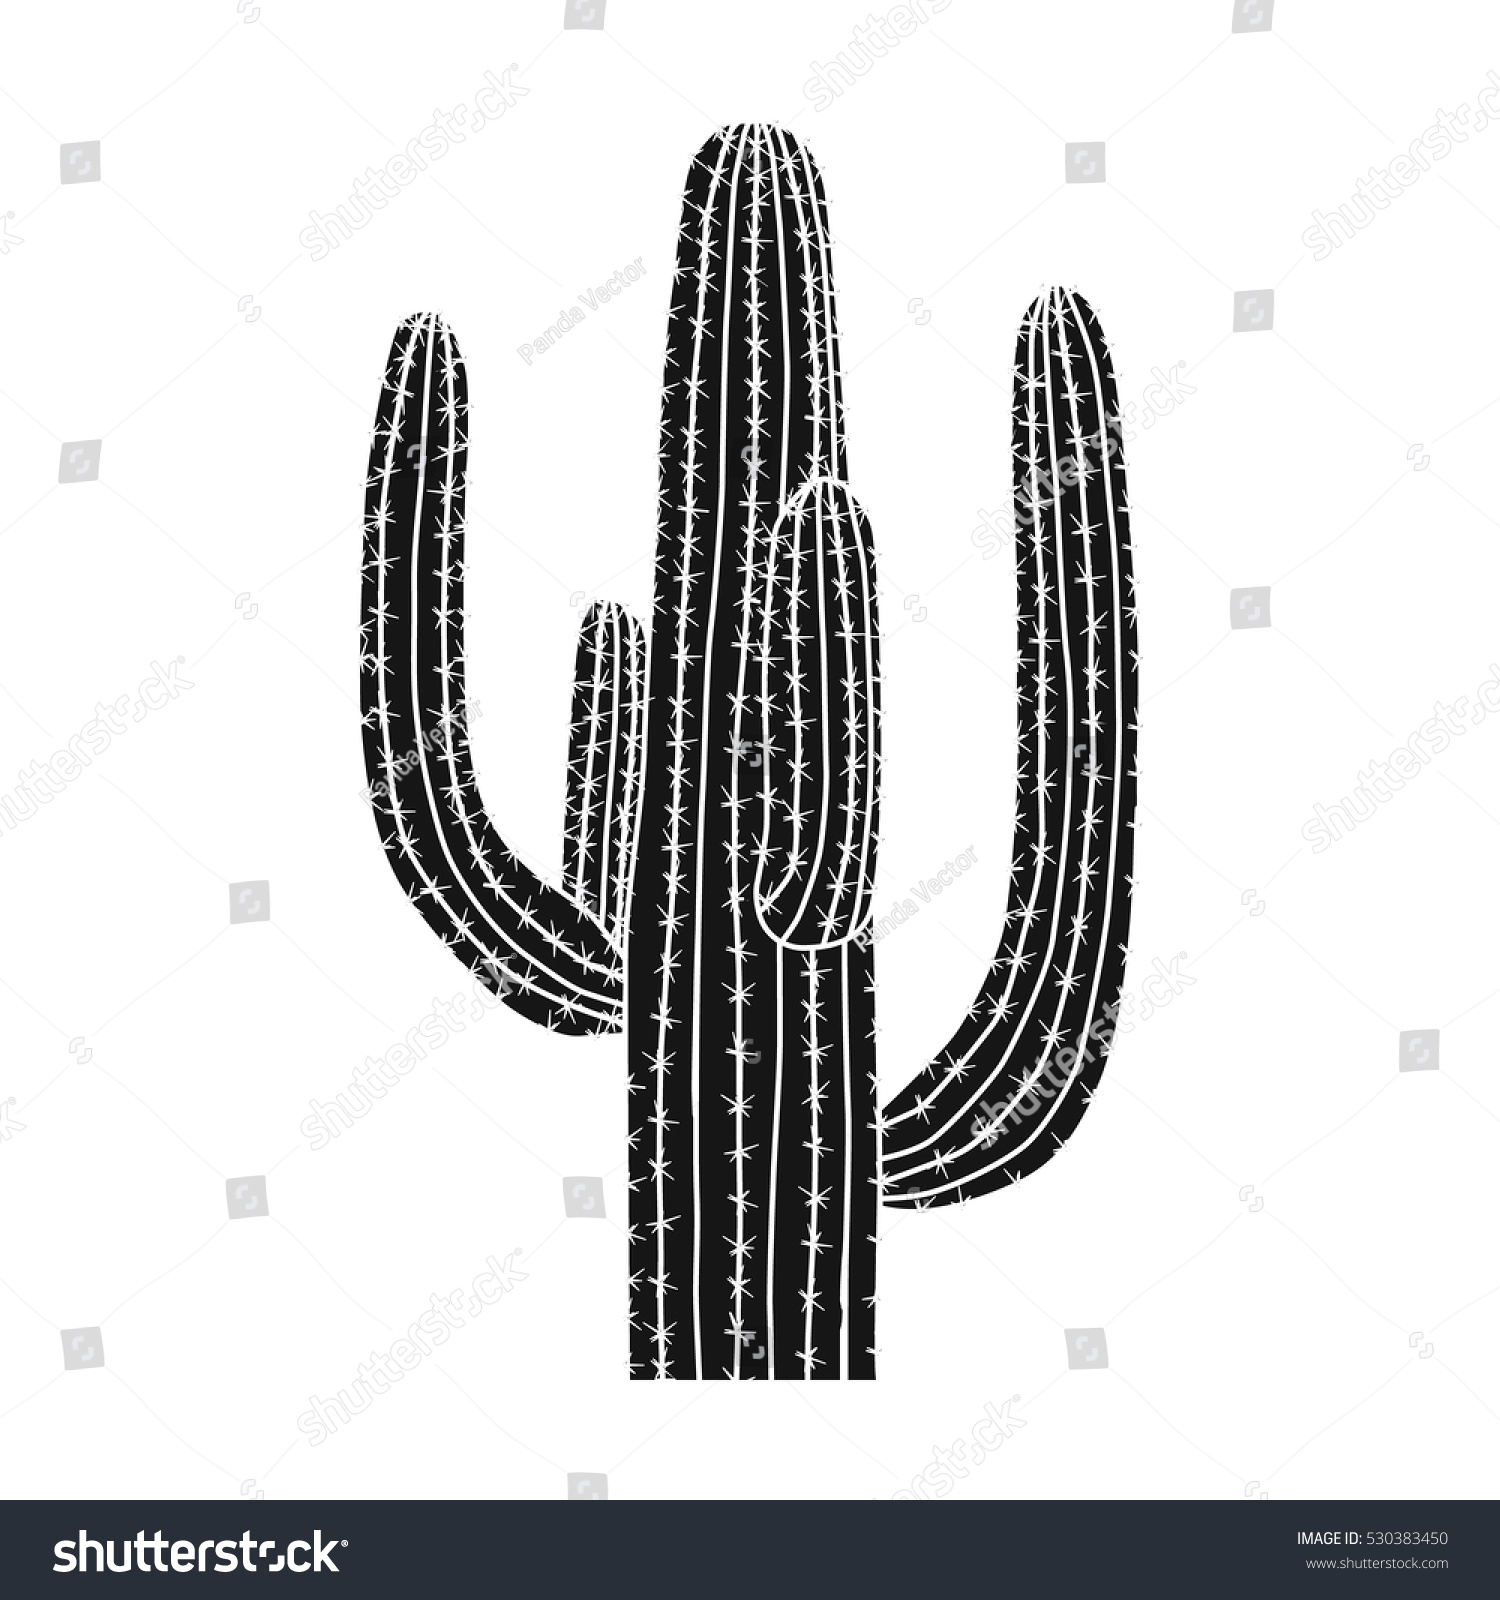 SVG of Mexican cactus icon in black style isolated on white background. Mexico country symbol stock vector illustration. svg